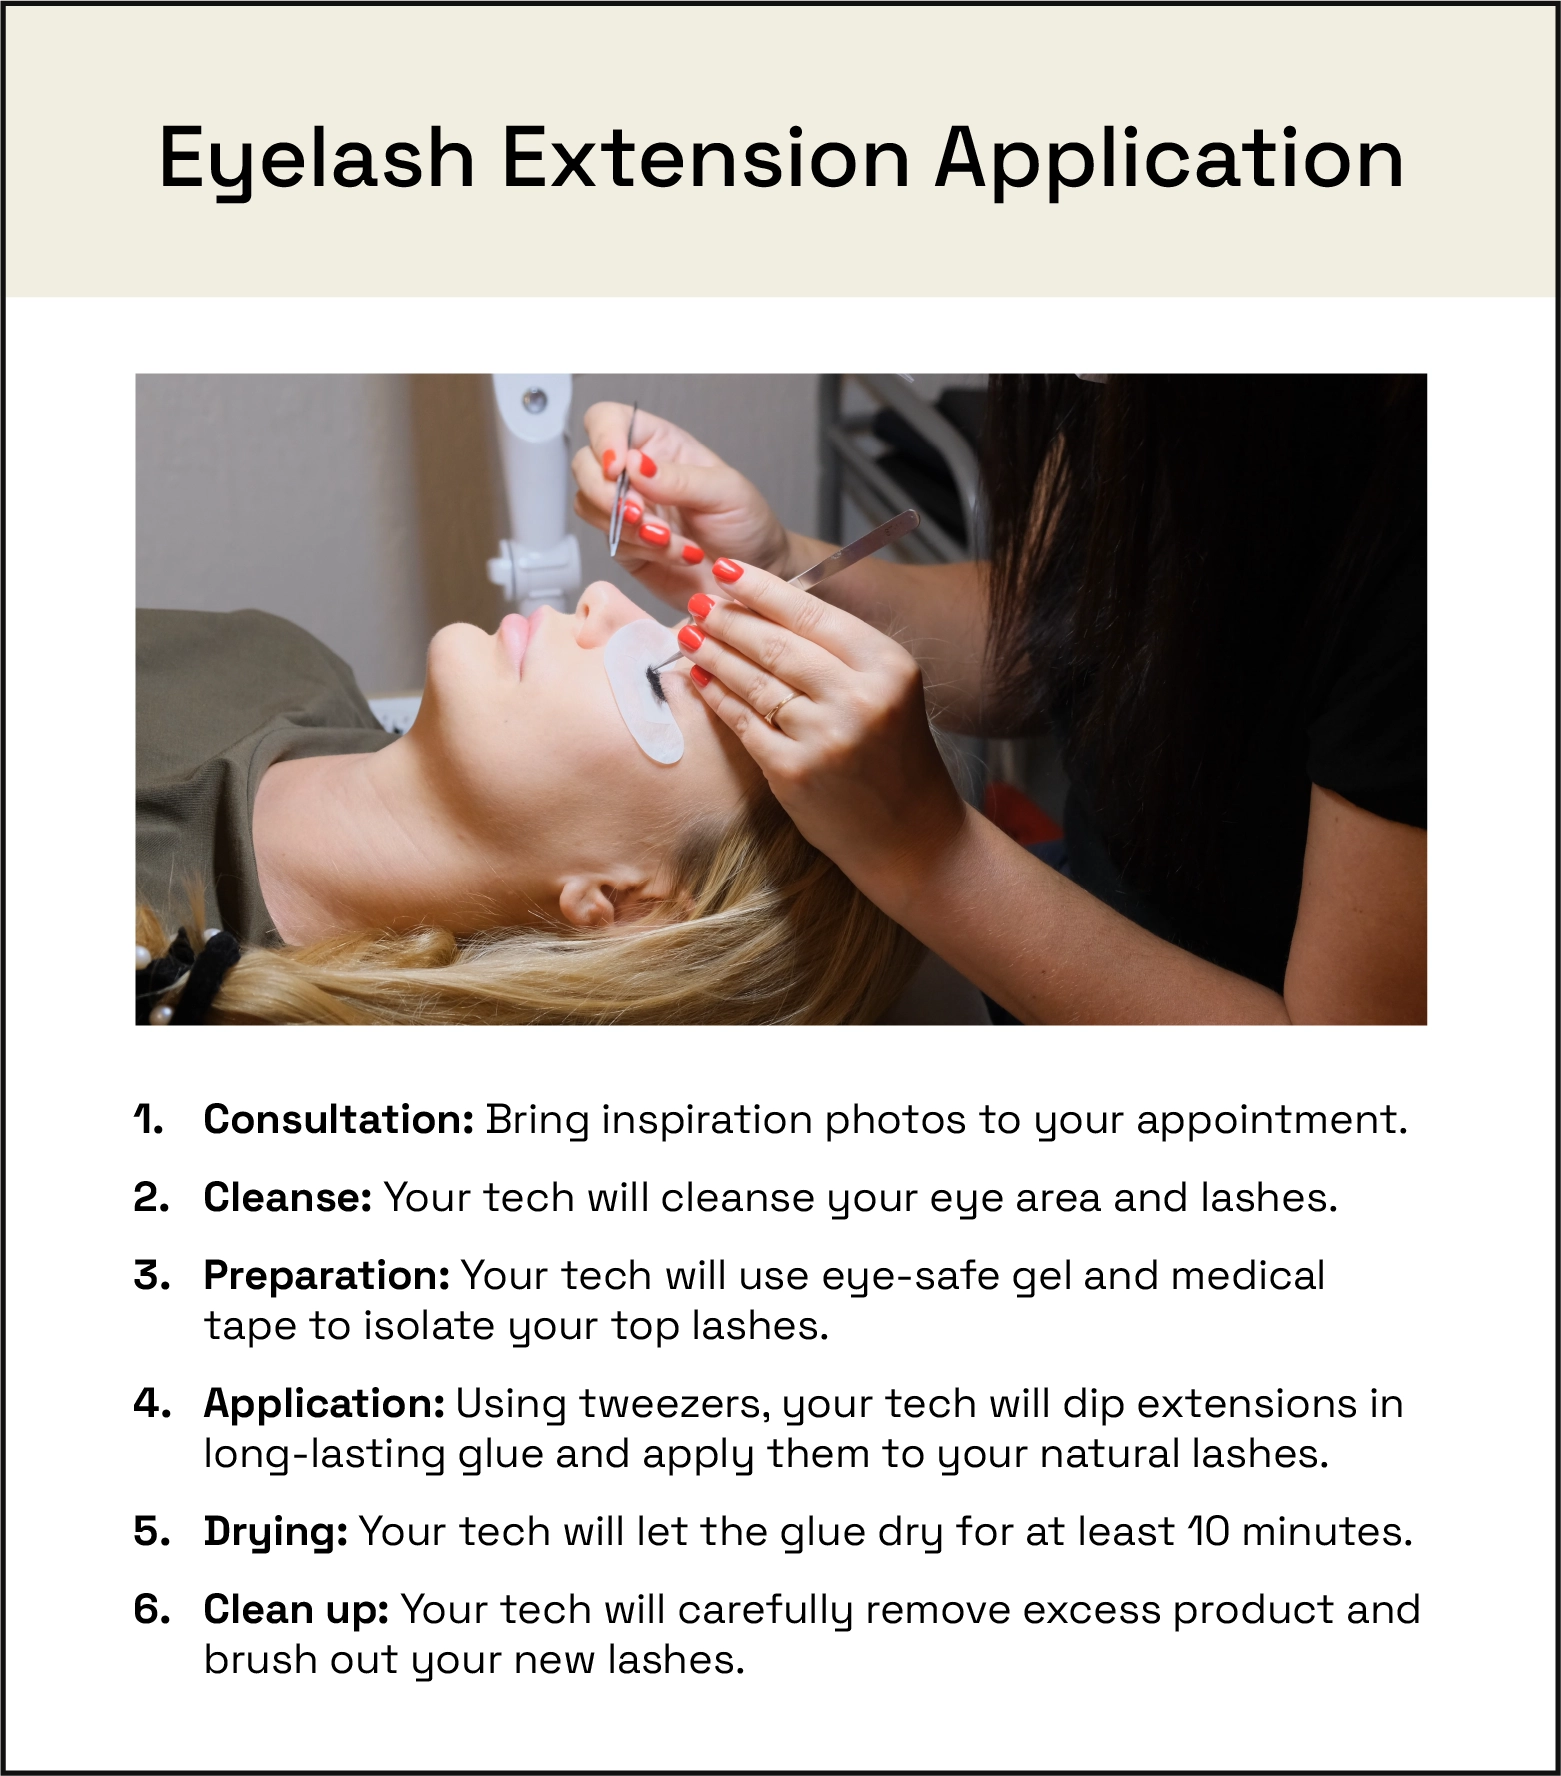 The six steps of eyelash extension application are consultation, cleanse, preparation, application, drying, and clean up.